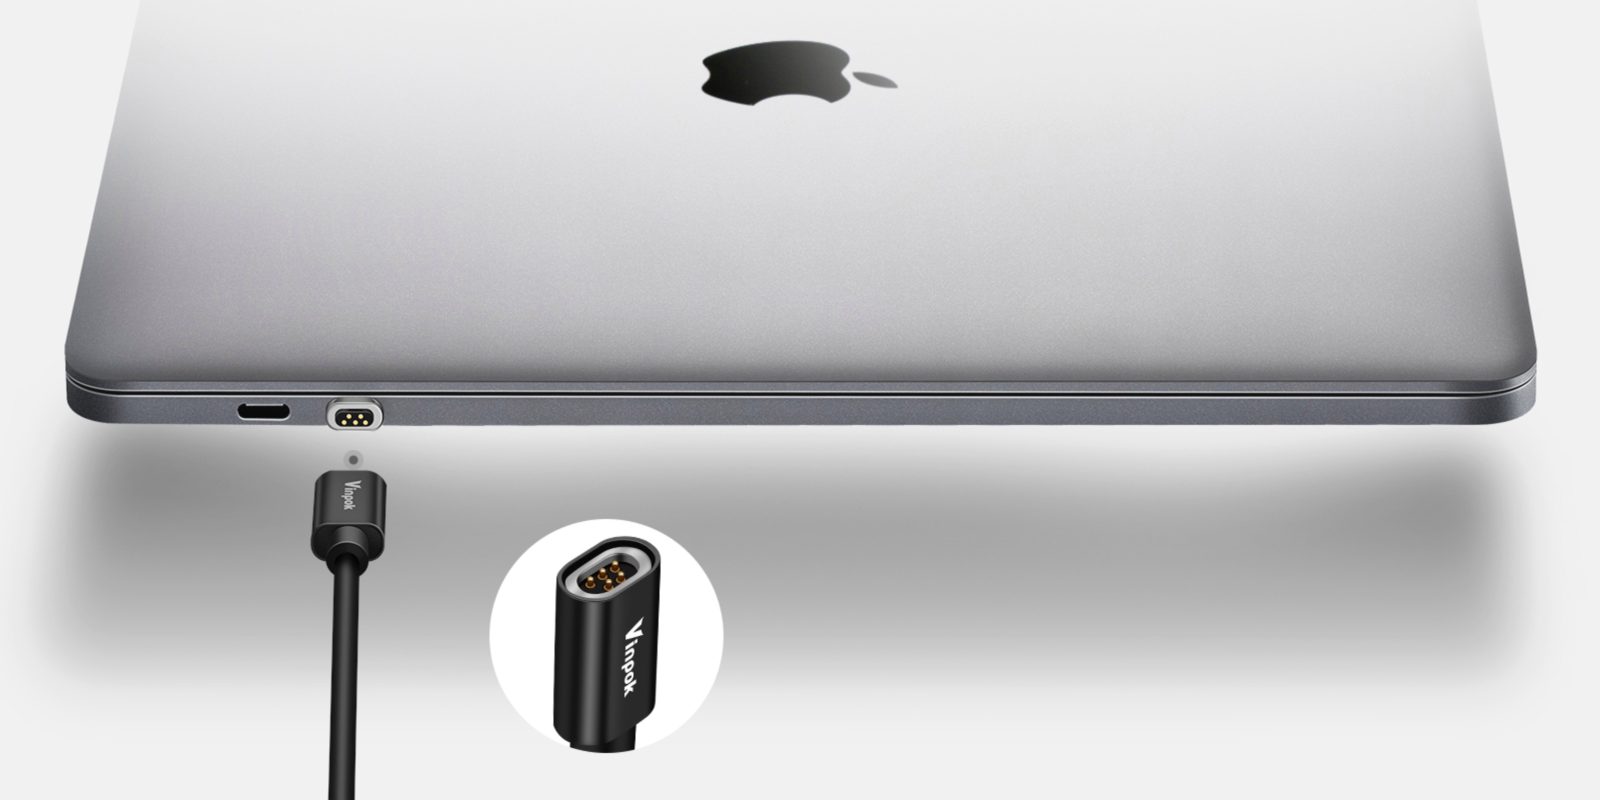 New Bolt USB-C cable brings MagSafe Functionality to all MacBook Models